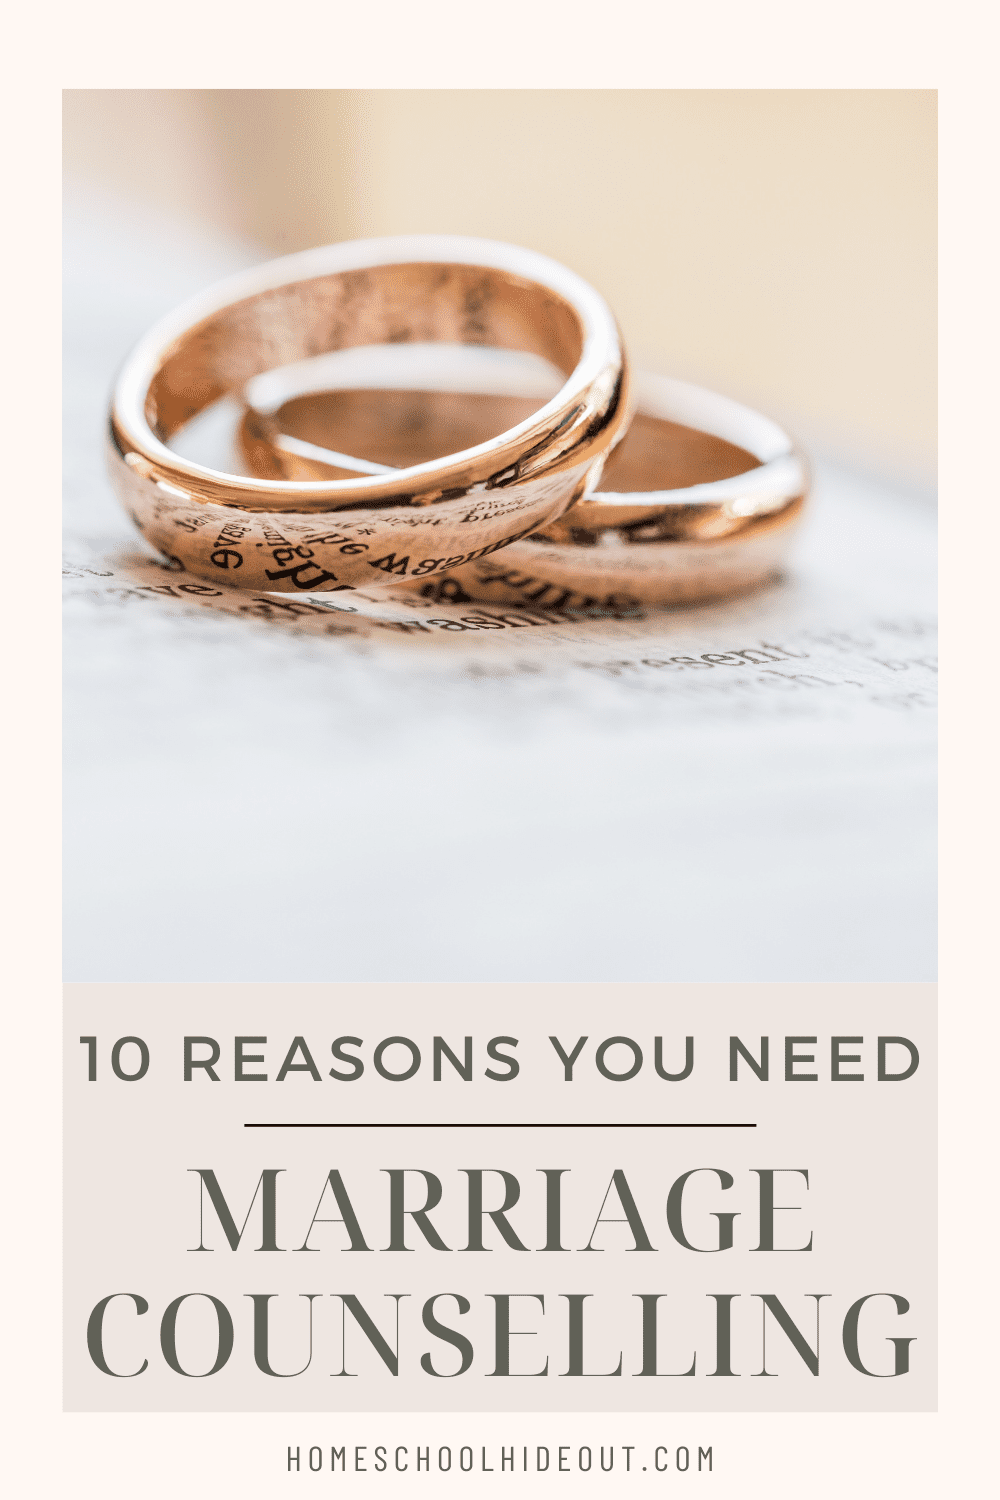 Marriage counselling can help with so many things but I never even thought of #6!